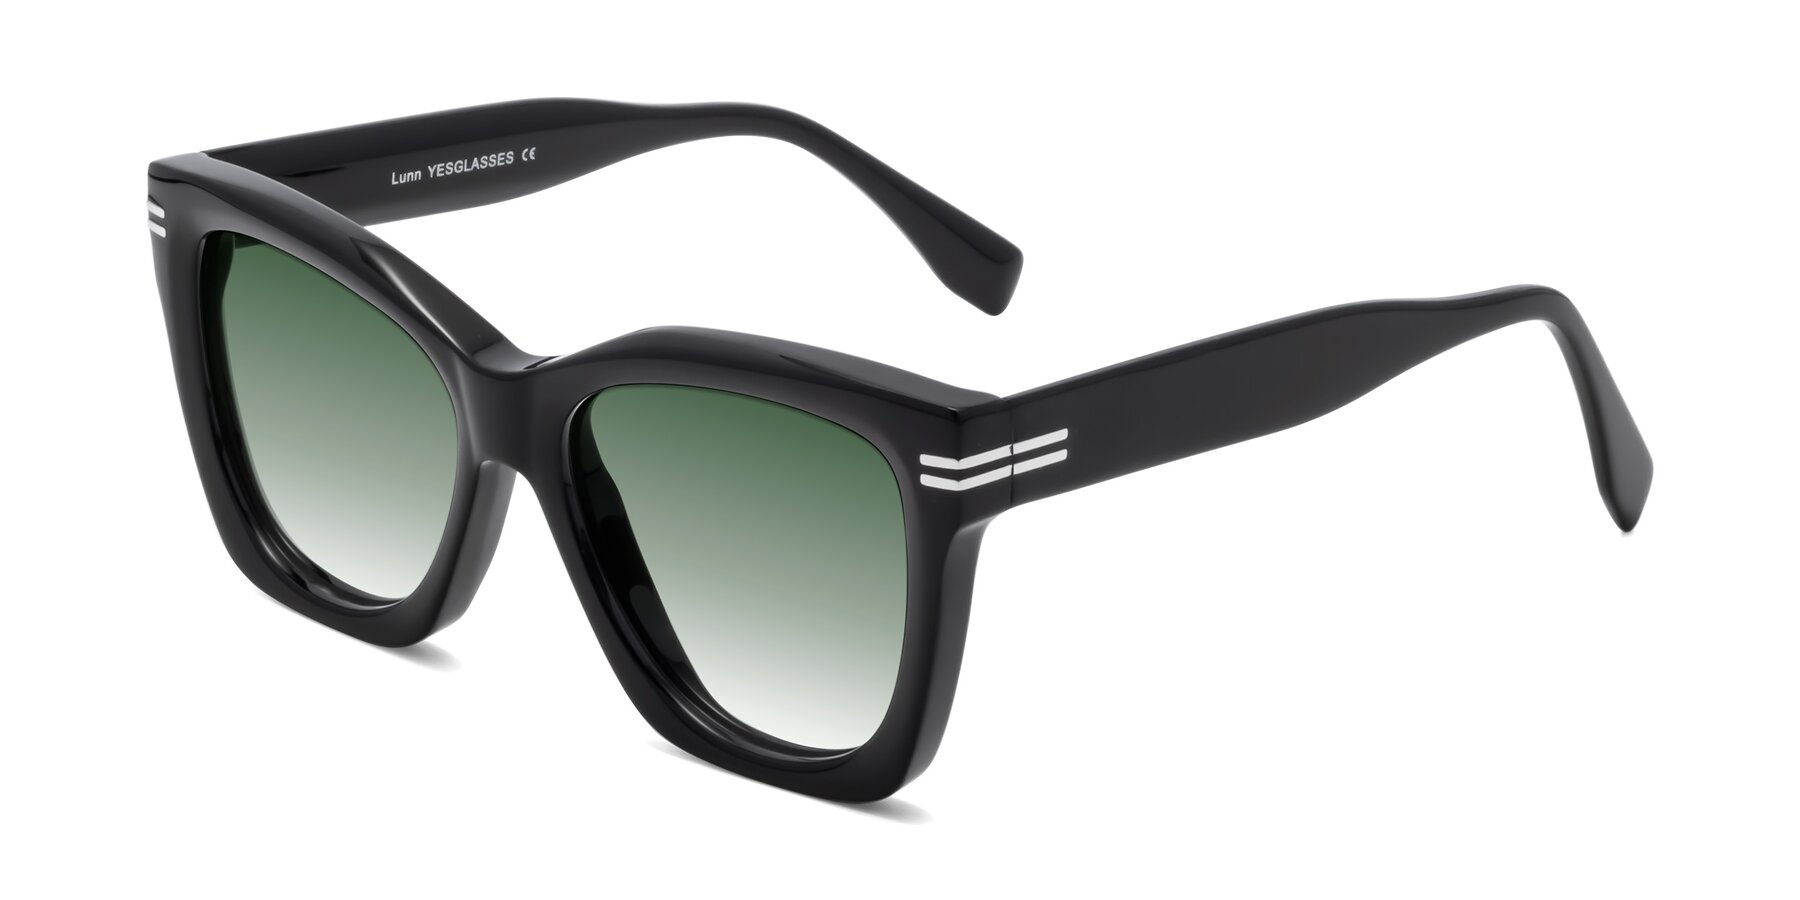 Angle of Lunn in Black with Green Gradient Lenses